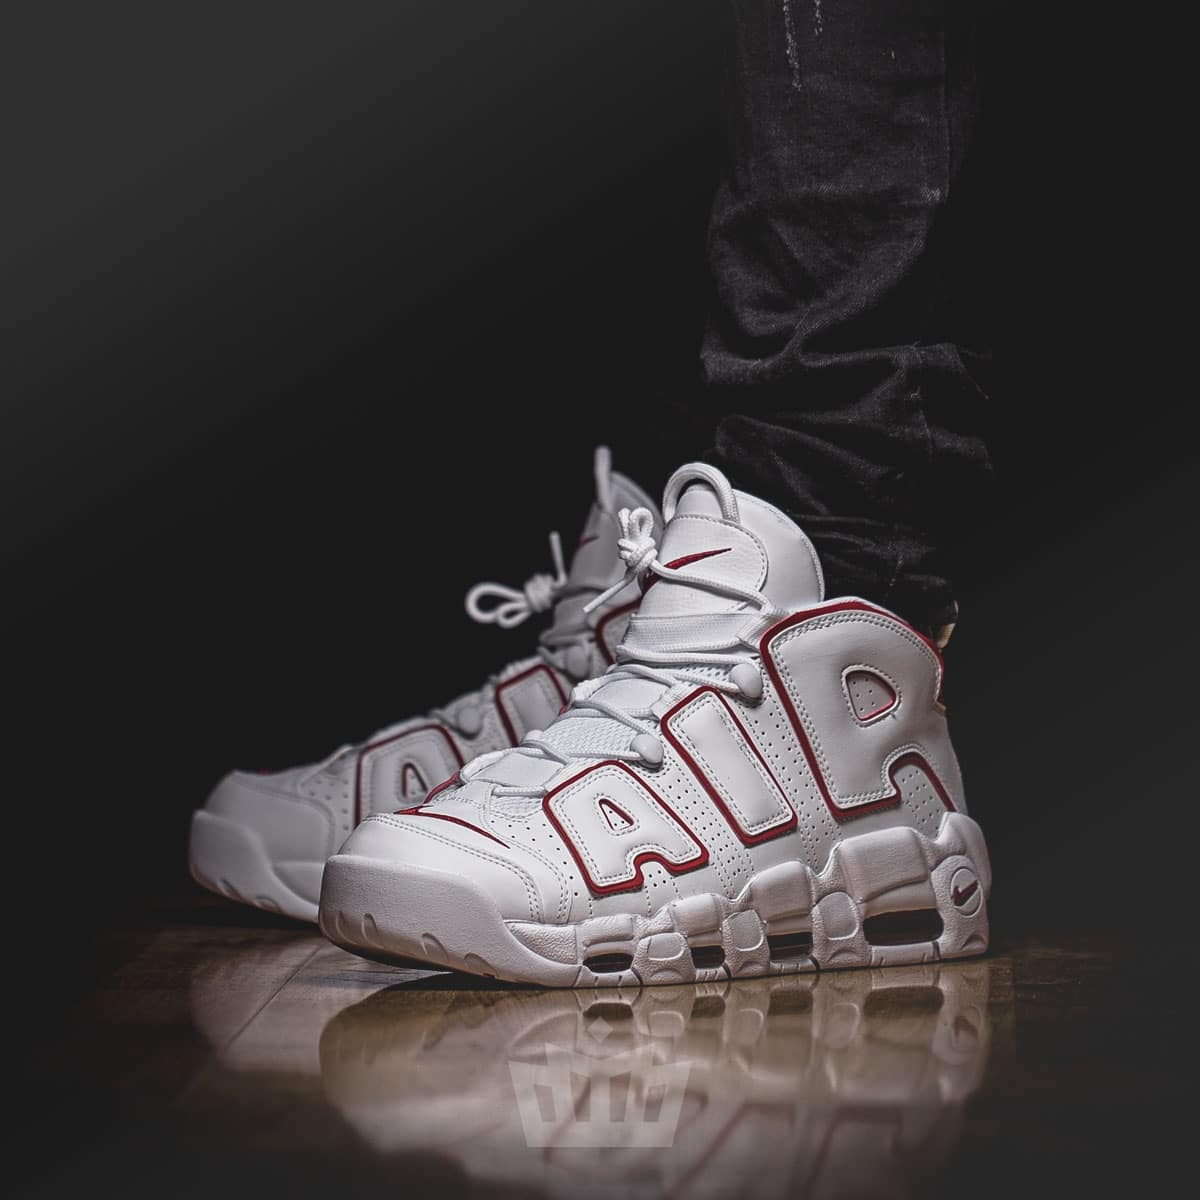 Nike Air More Uptempo 96 White Univeristy Red 921948-102 3